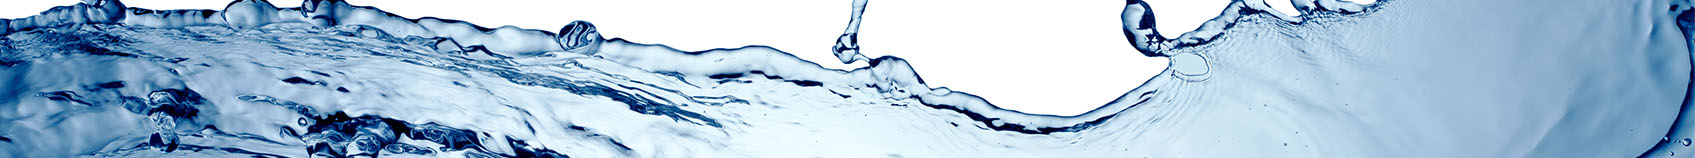 Water banner image